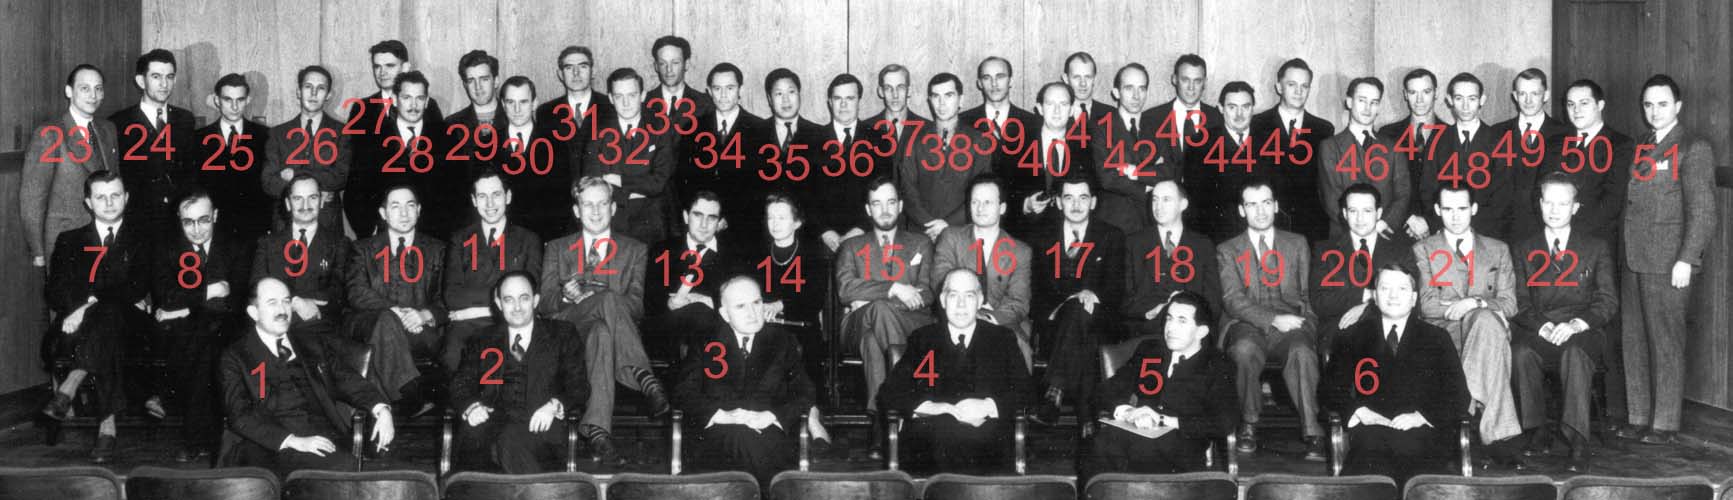 1939 Conference Photo